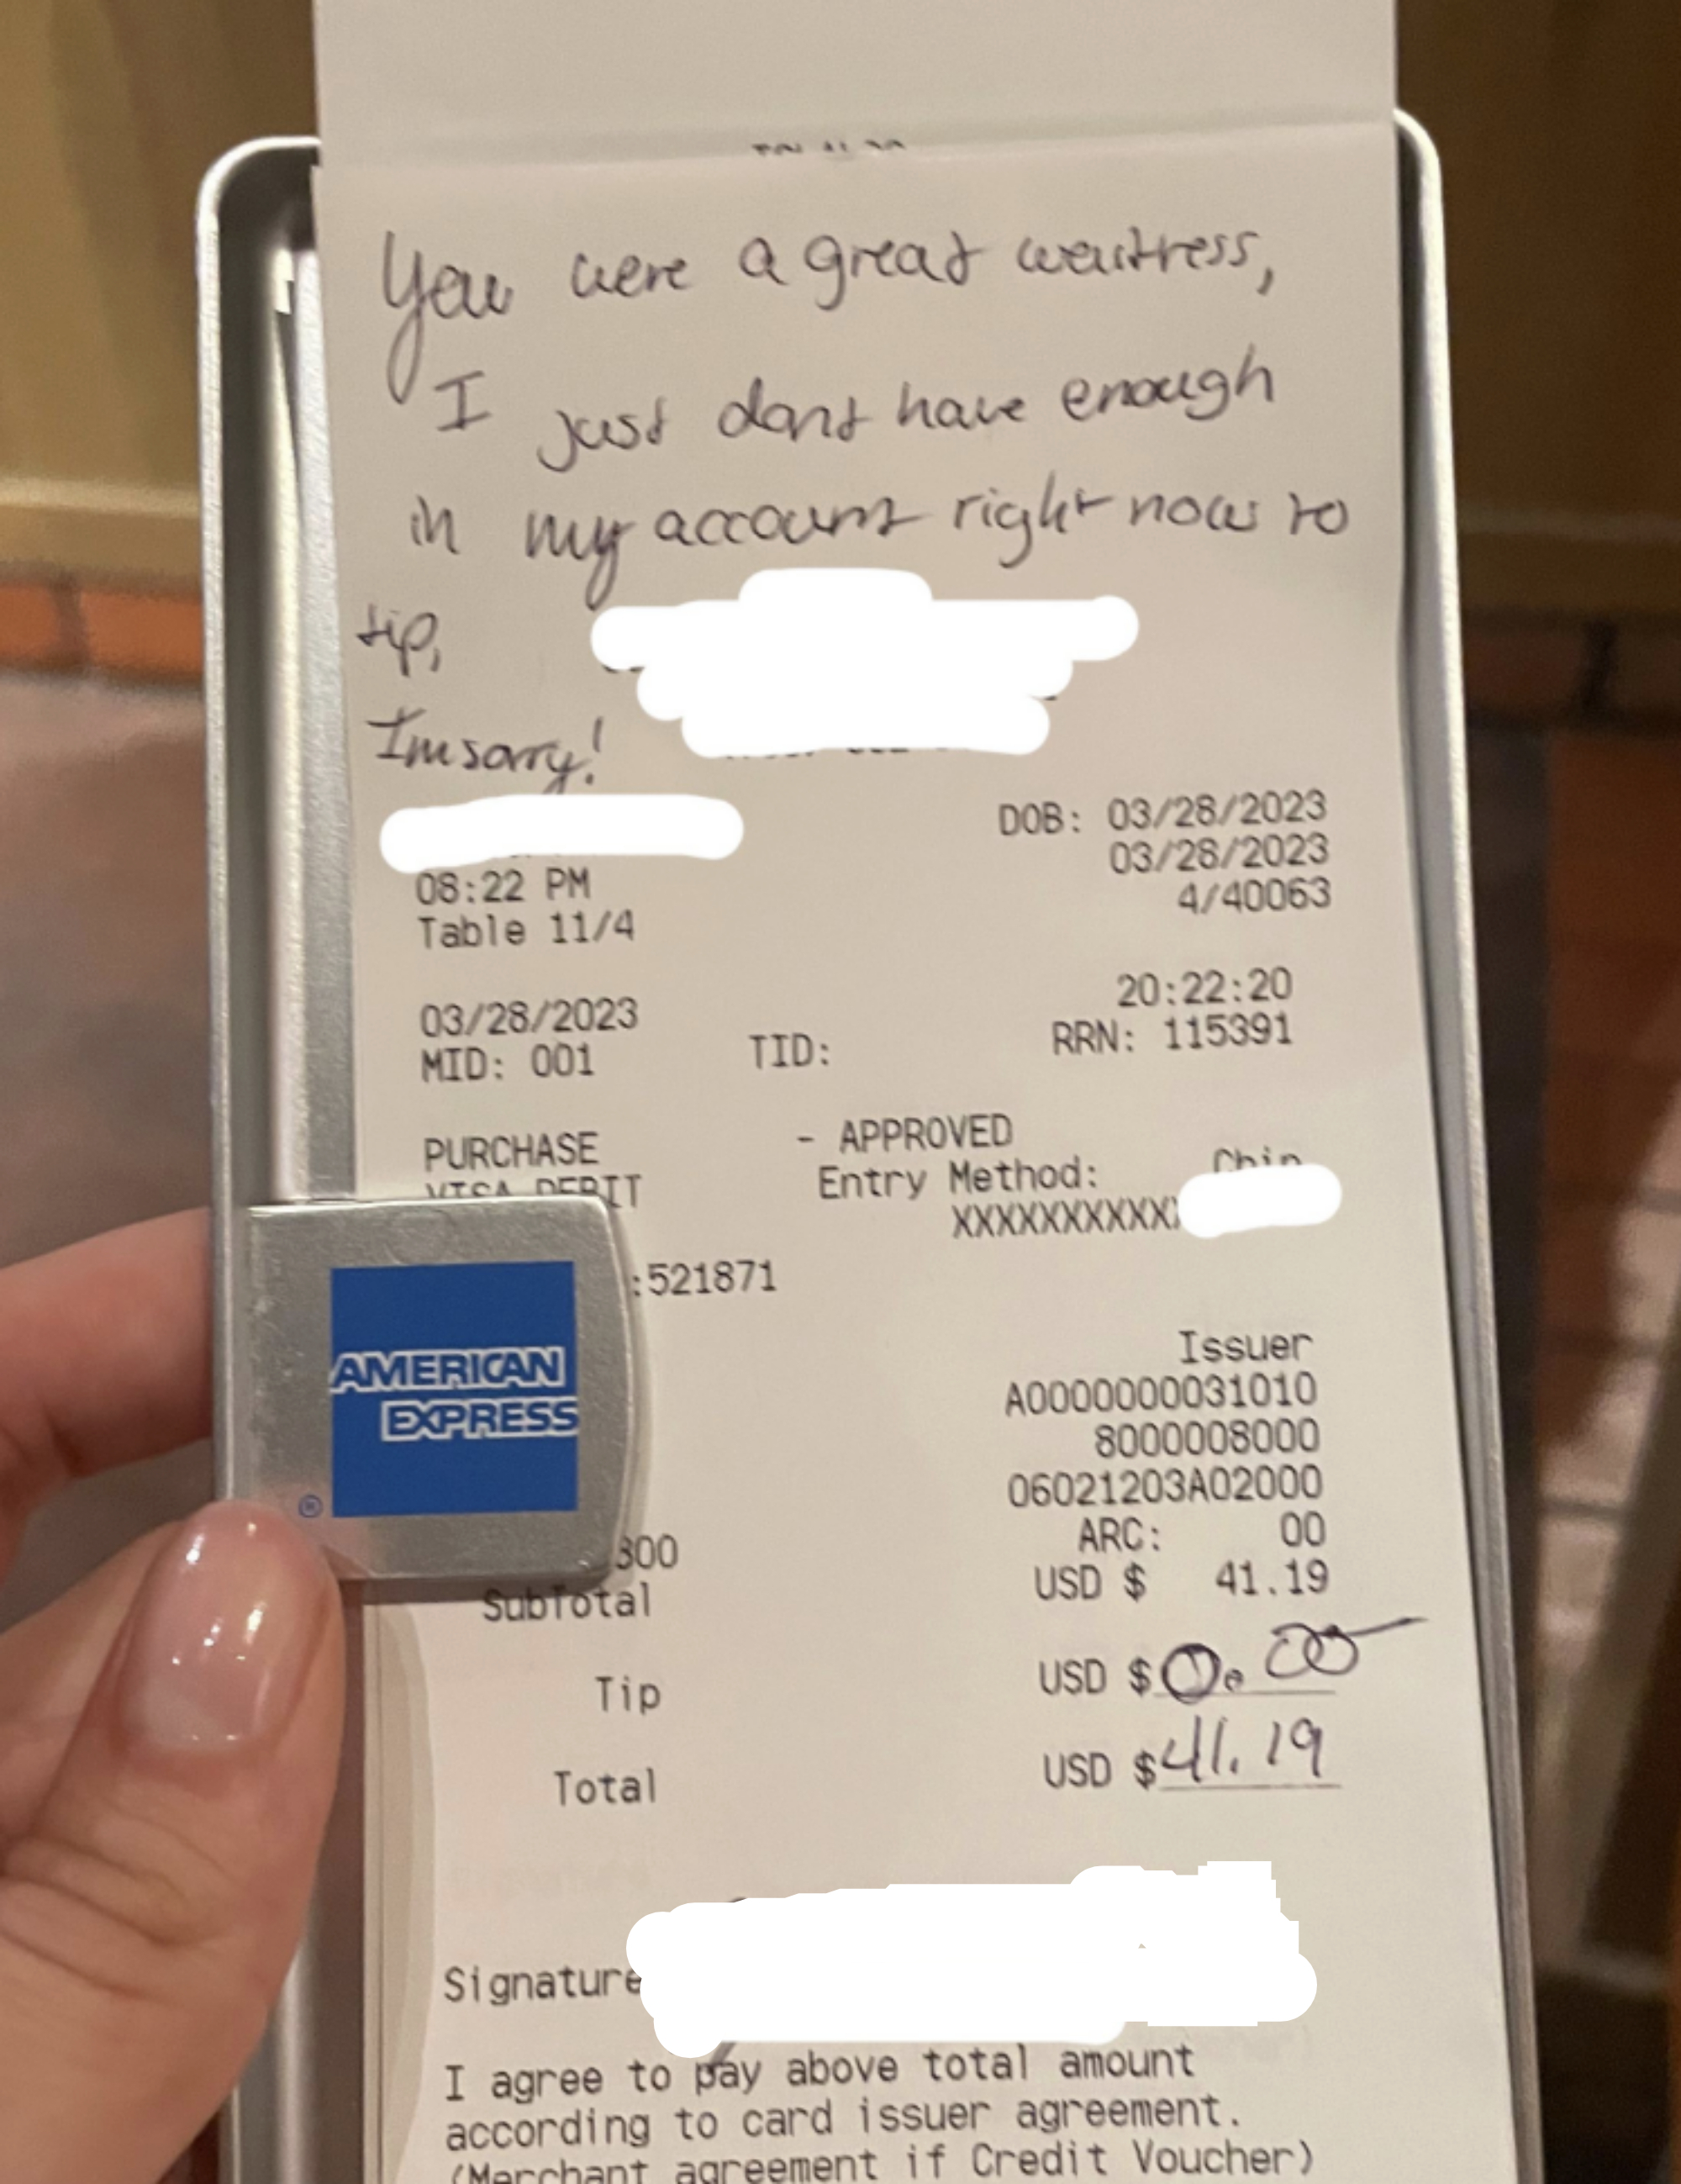 A receipt with no tip